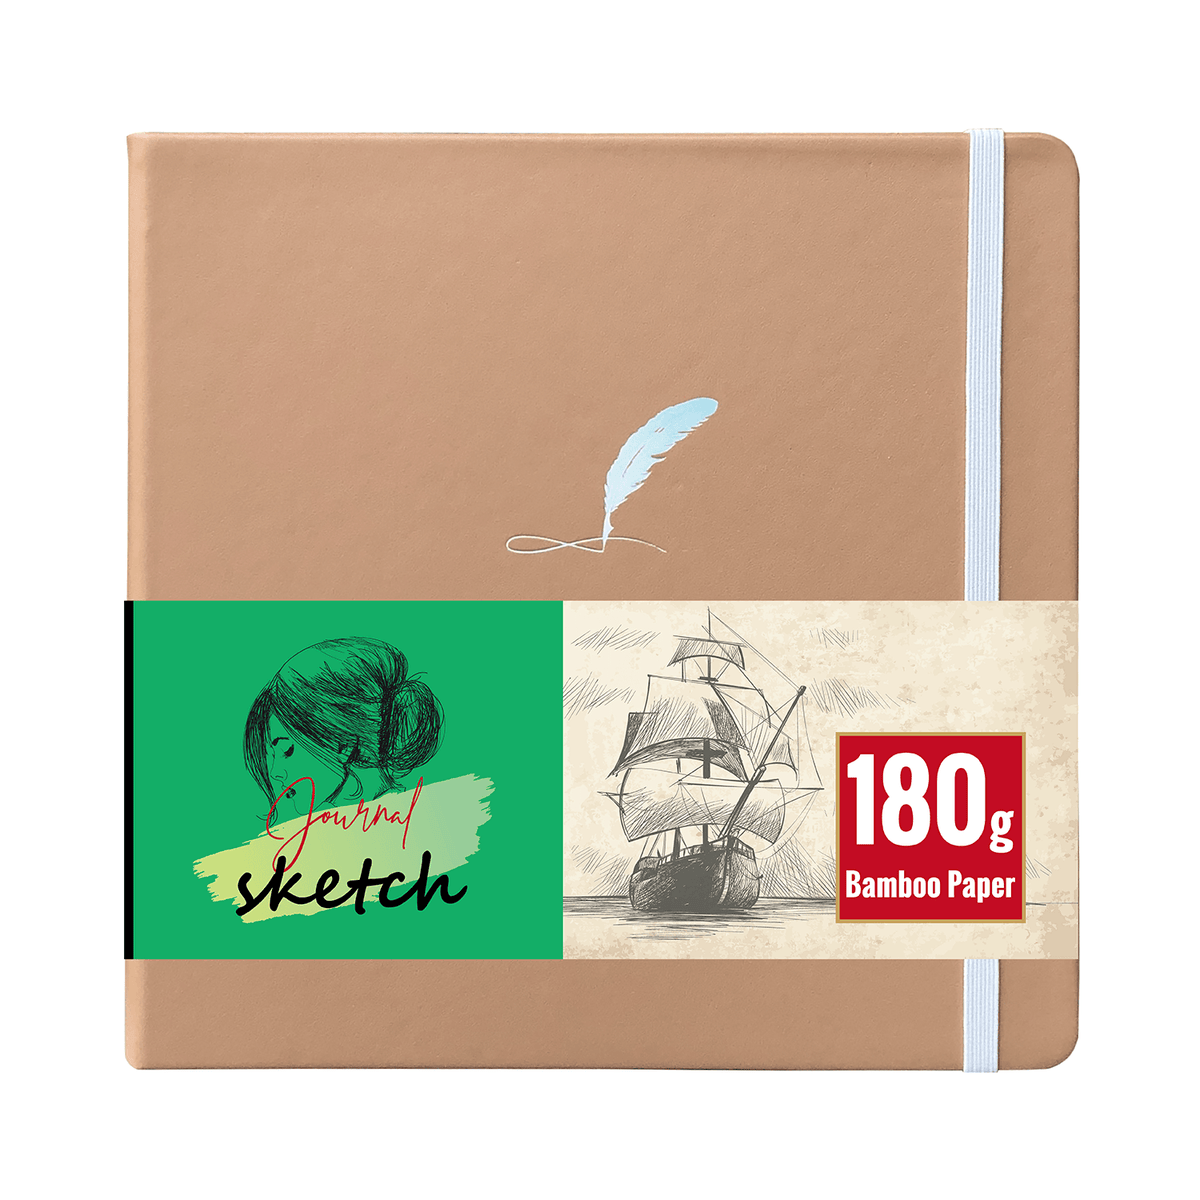 8X8 Square Hardcover SKetchbook Journal 180GSM Bamboo PAPER 128 Pages - Doe - bukenotebook